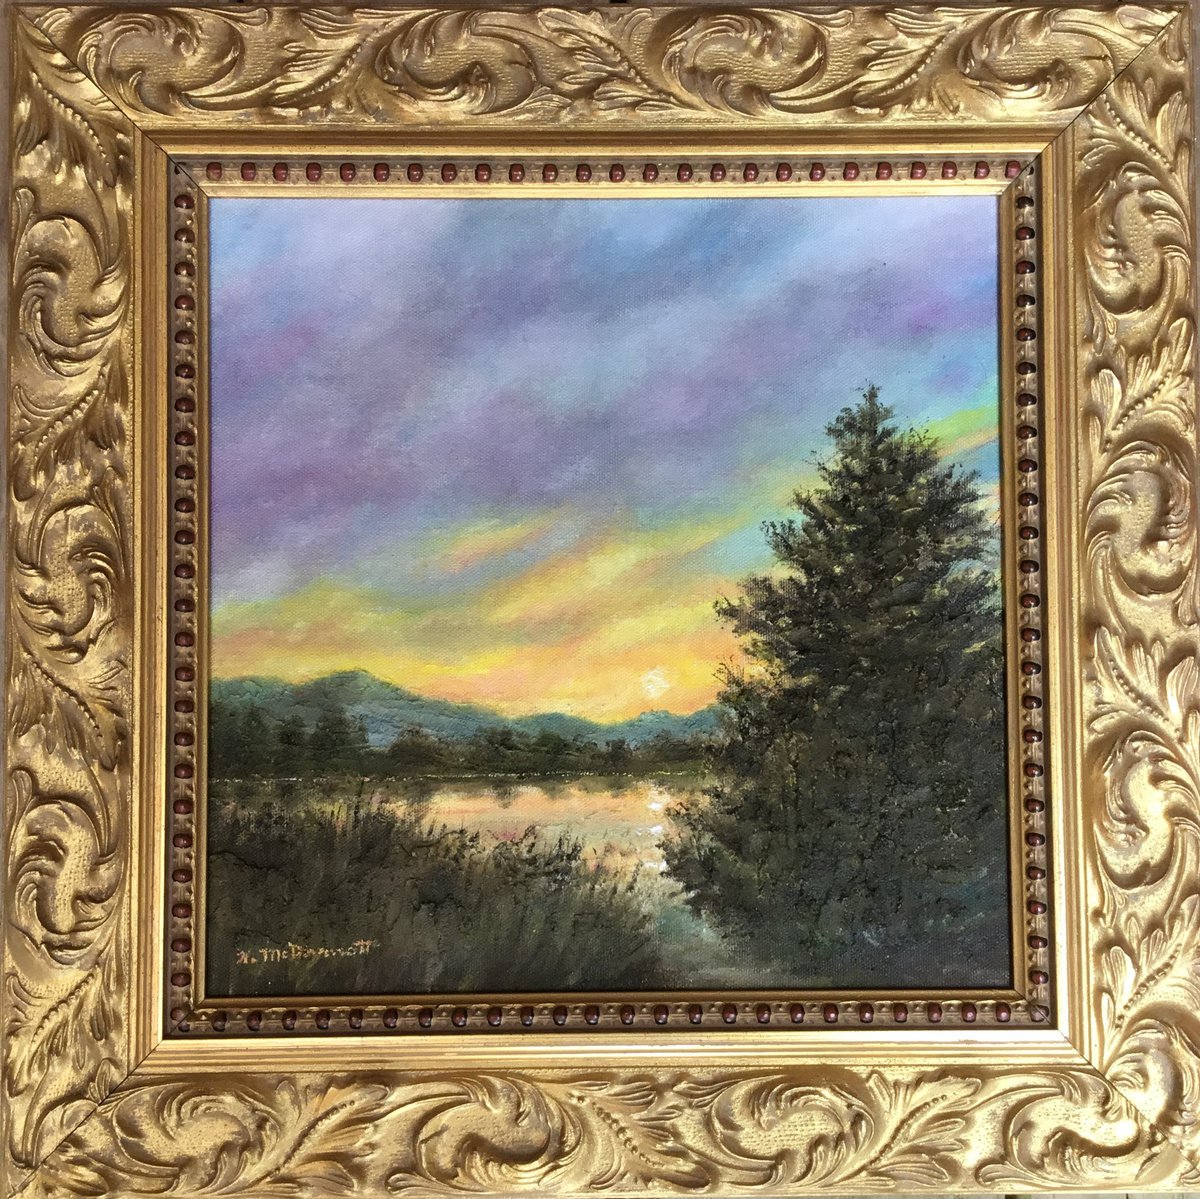 EDGE OF THE POND - oil 11.75 inch square canvas by Kathleen McDermott